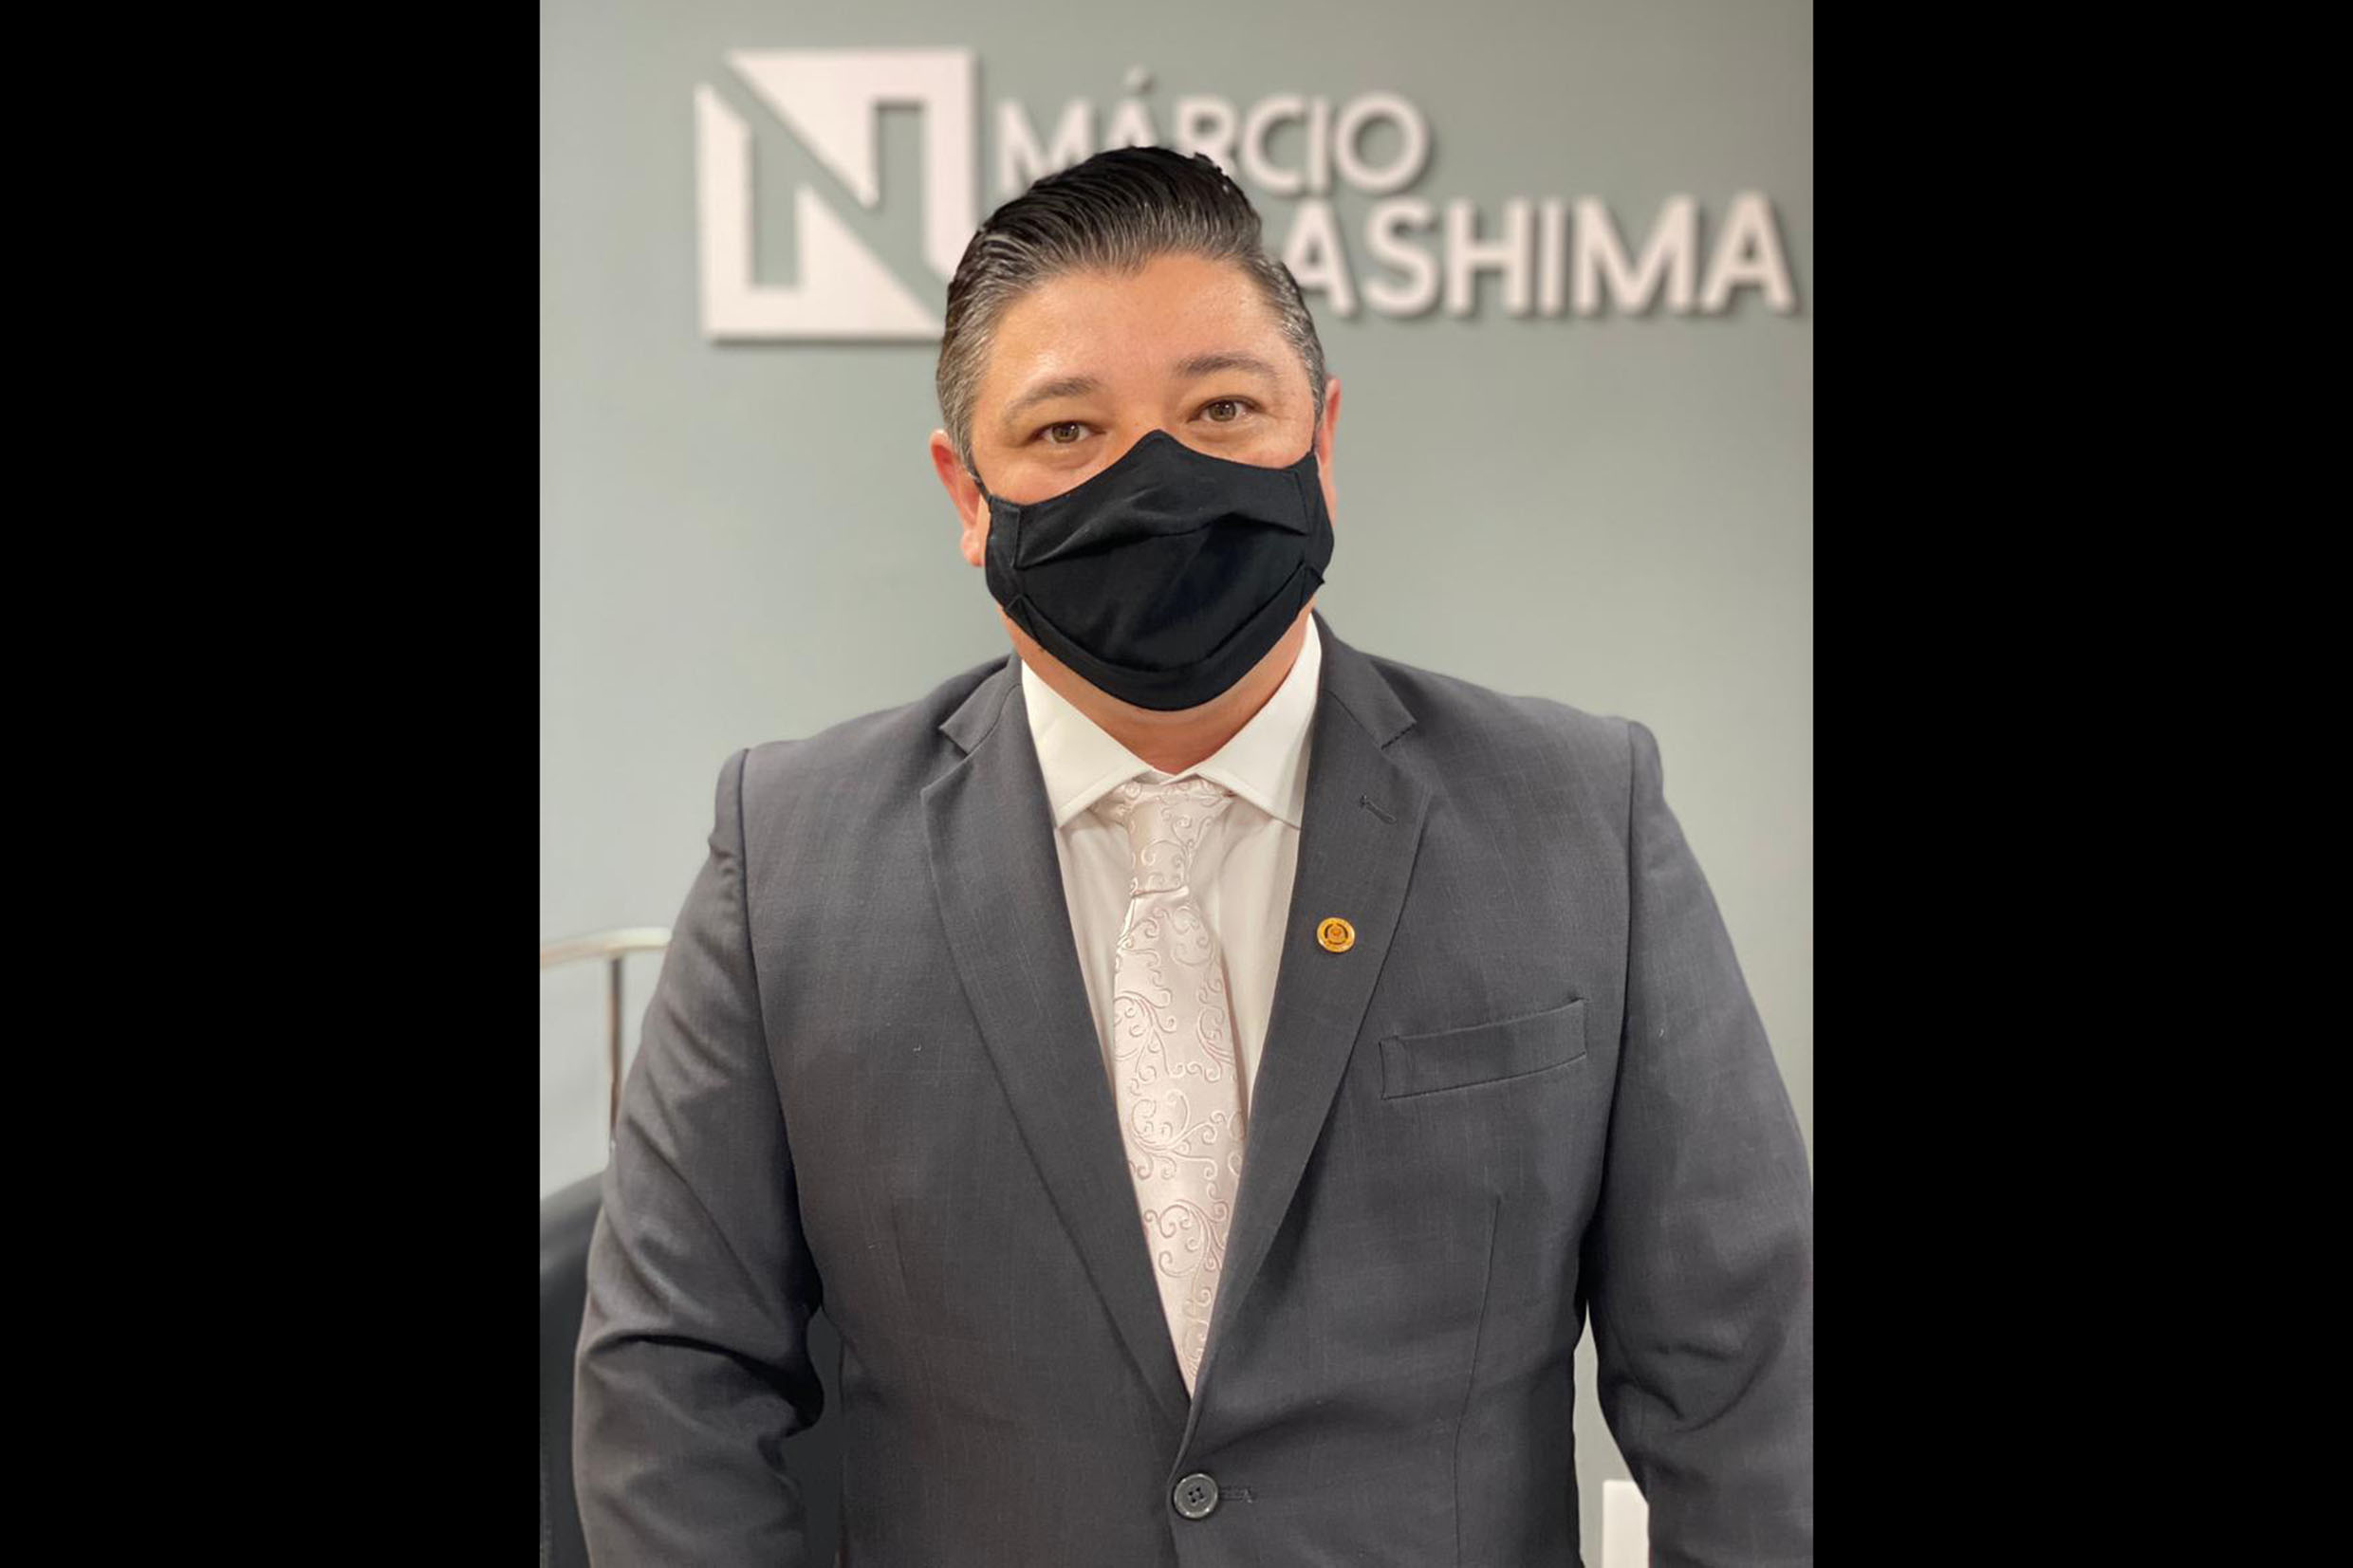 Marcio Nakashima<a style='float:right' href='https://www3.al.sp.gov.br/repositorio/noticia/N-05-2021/fg266444.jpg' target=_blank><img src='/_img/material-file-download-white.png' width='14px' alt='Clique para baixar a imagem'></a>